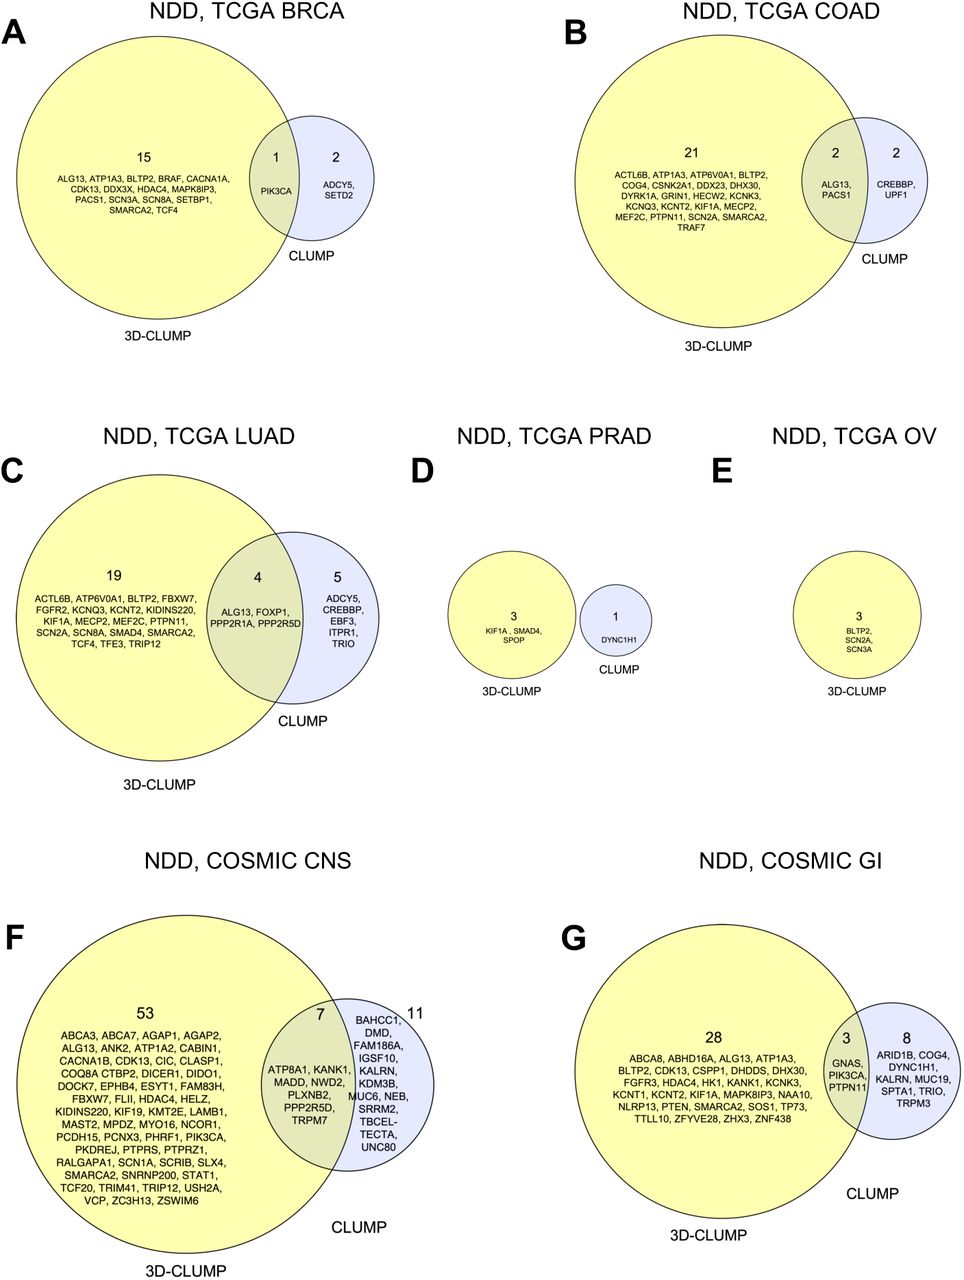 Proteome-Wide Assessment of Clustering of Missense Variants in